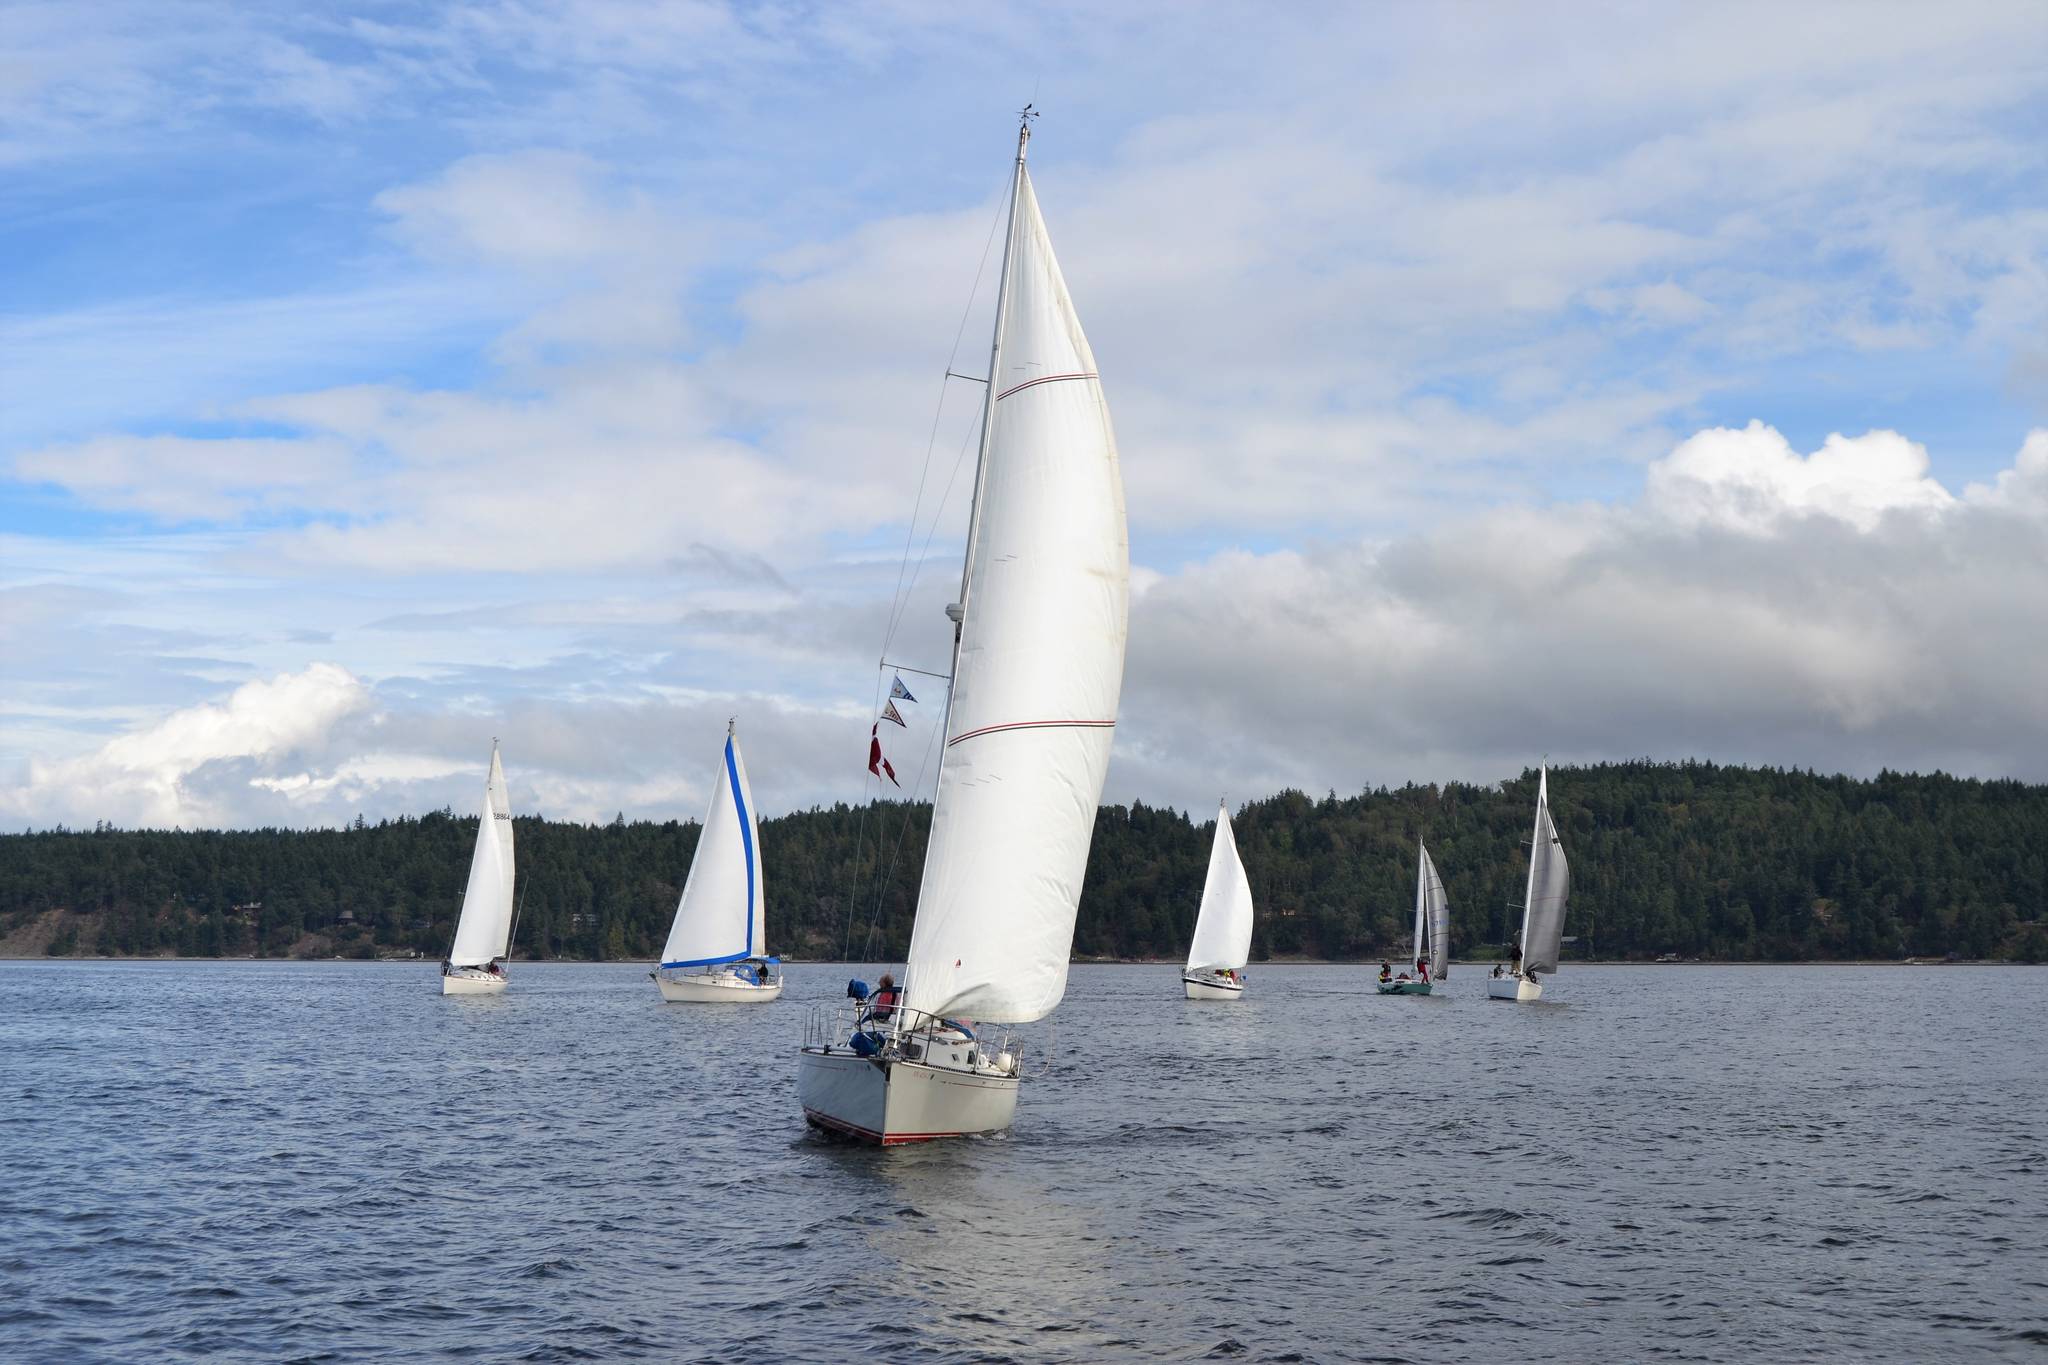 This year’s Reach and Row for Hospice featured nine sailboats along with 21 rowers throughout Waterfront Day at John Wayne Marina and Sequim Bay on Sept. 15. Sequim Gazette photo by Matthew Nash